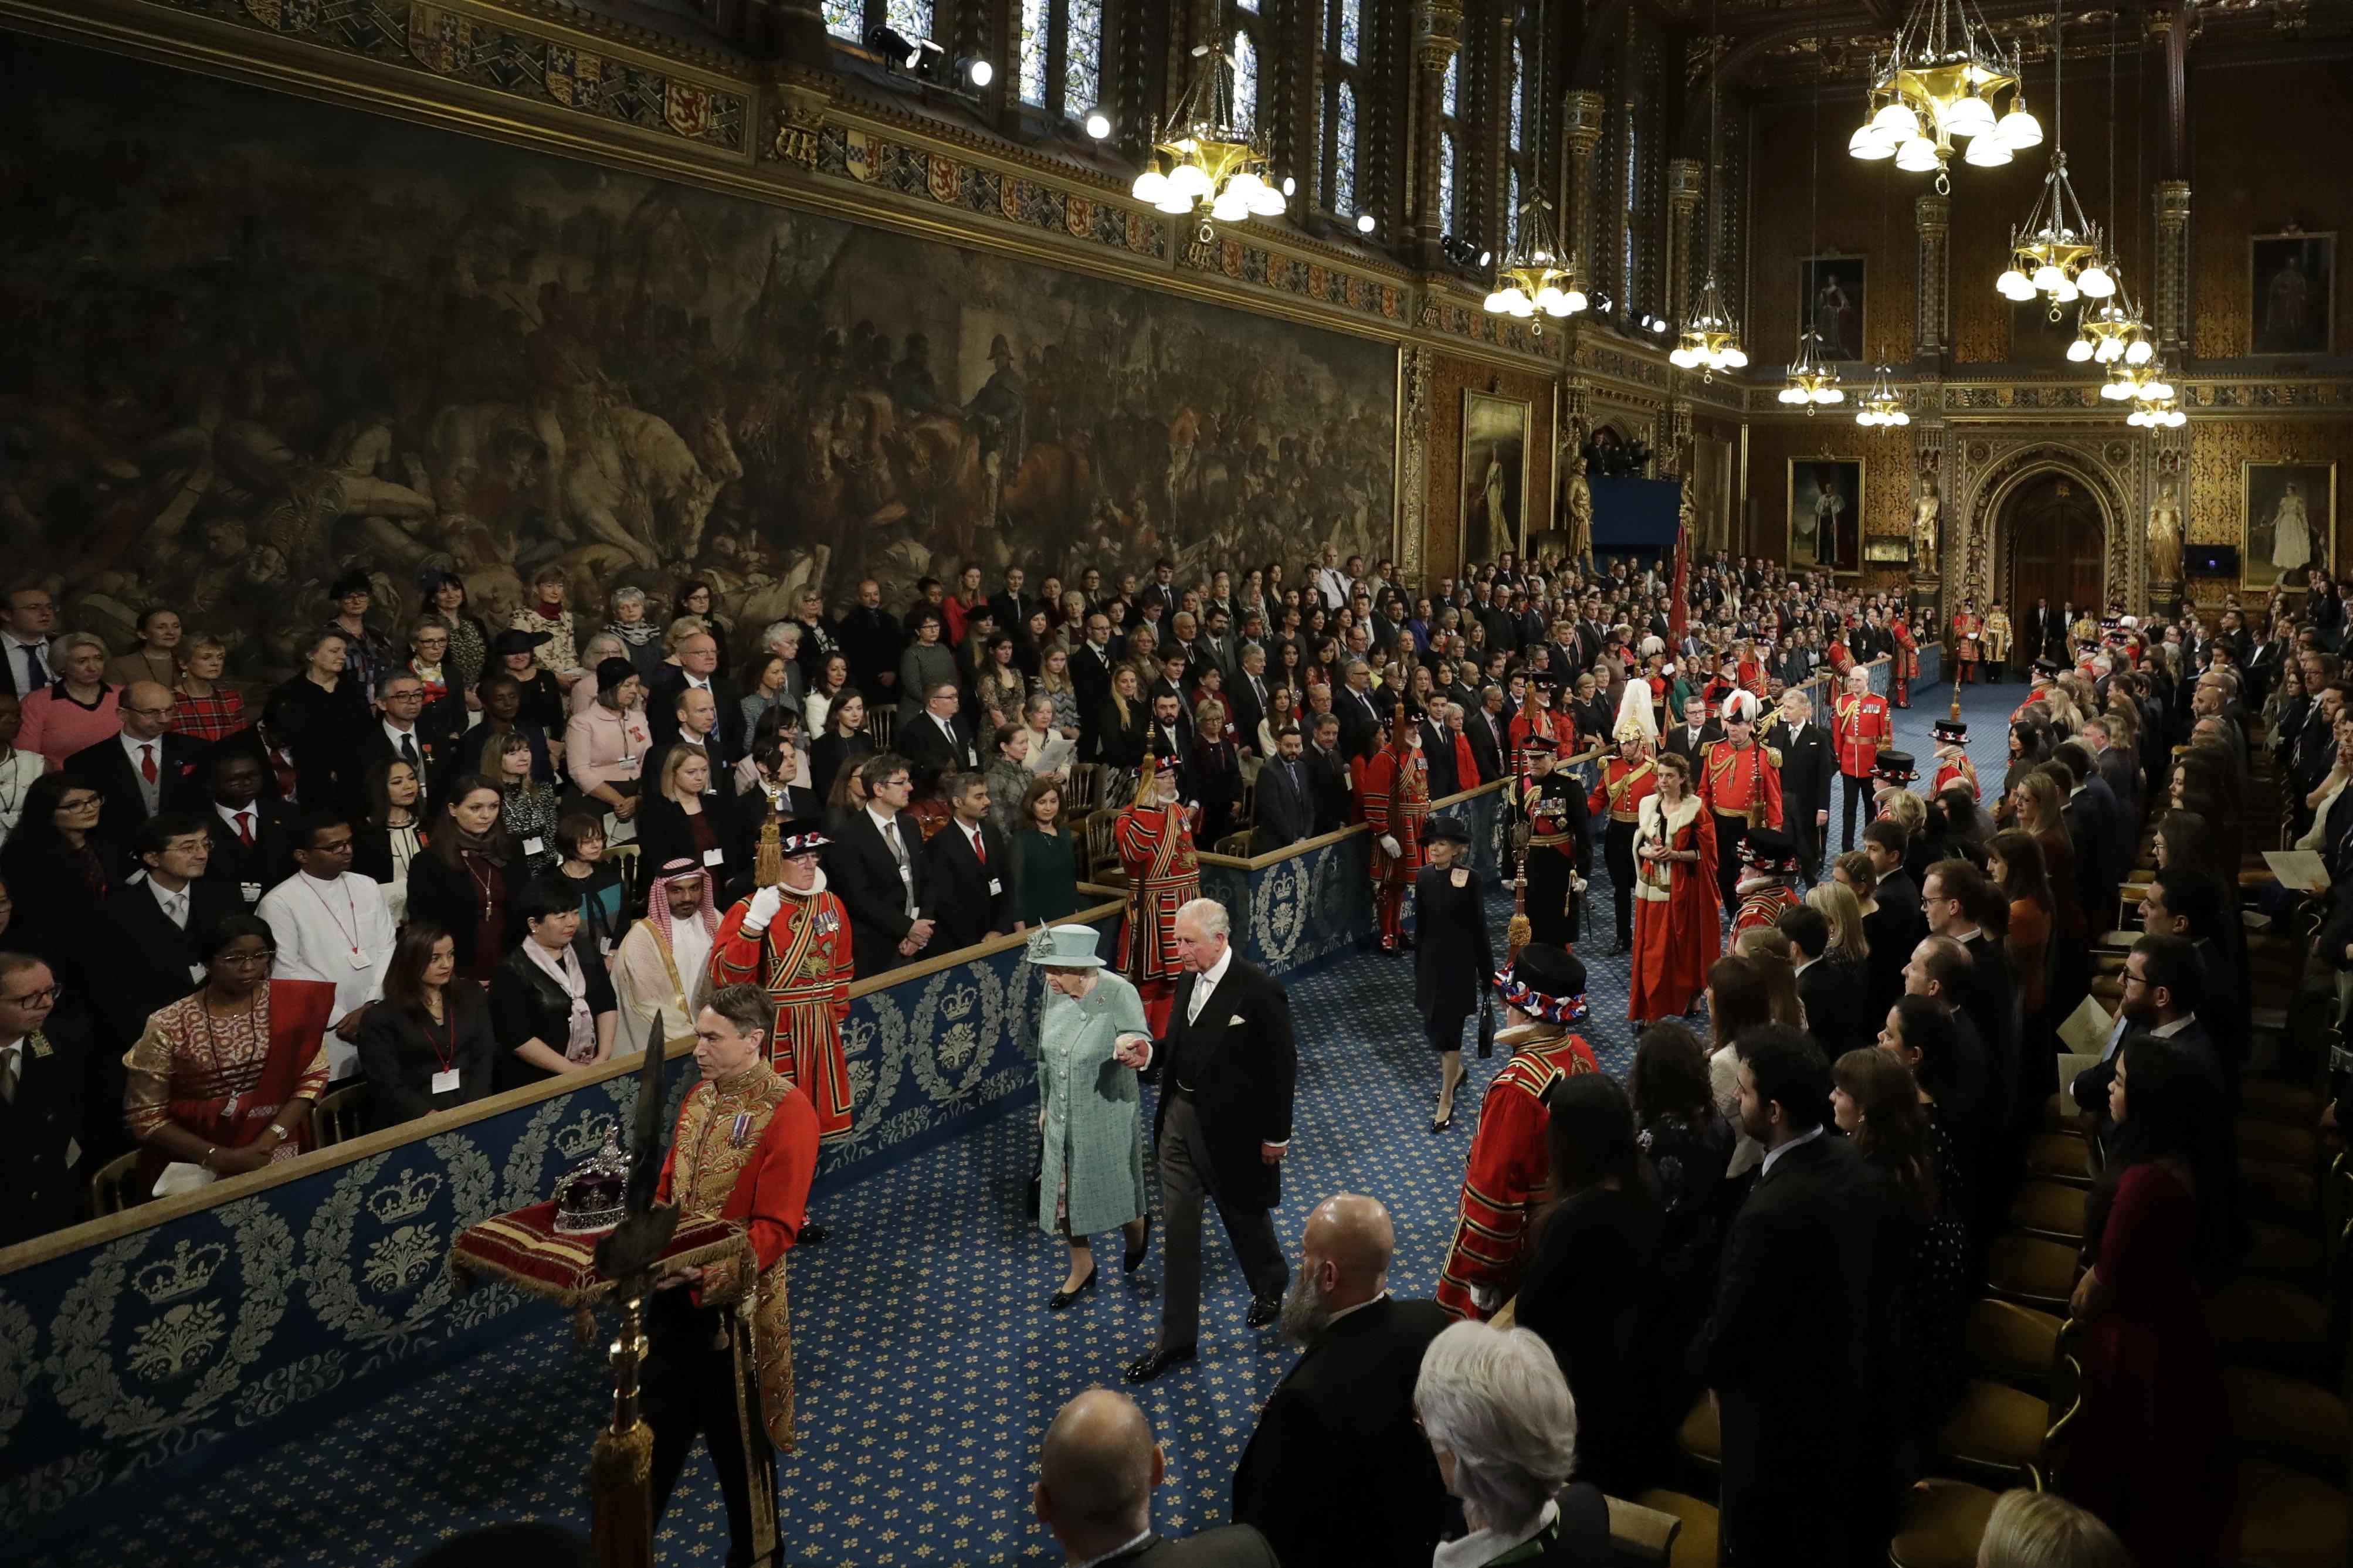 Queen Elizabeth II, accompanied by the Prince of Wales, proceed through the Royal Gallery before delivering the Queen's Speech during the State Opening of Parliament in the House of Lords at the Palace of Westminster in London.